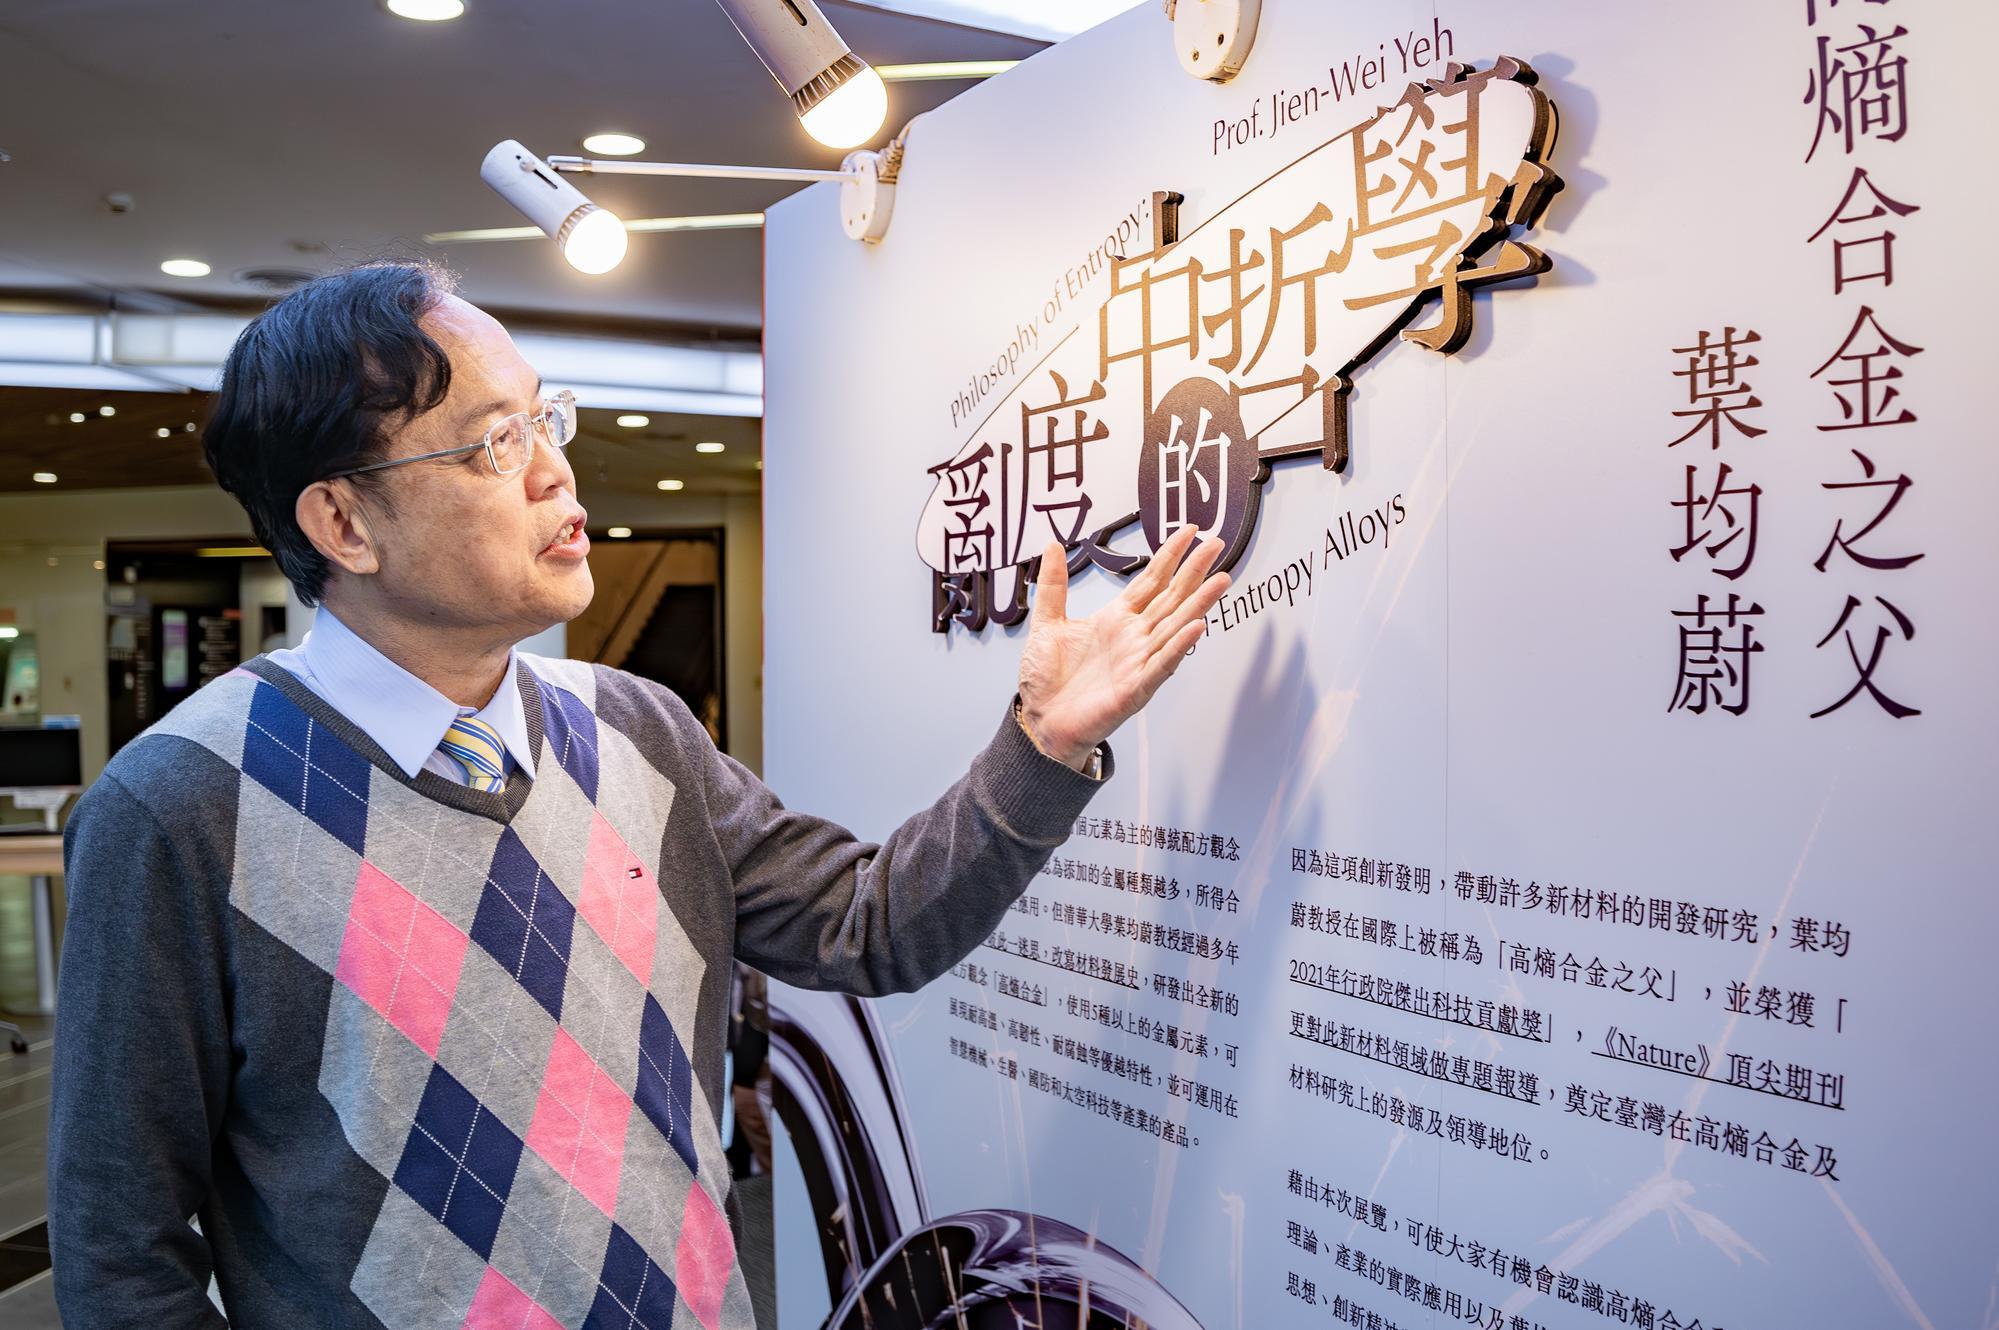 Chair Professor Jien-Wei Yeh (葉均蔚) from NTHU's Materials Science and Engineering is acclaimed as the “Father of High-Entropy Alloys.”